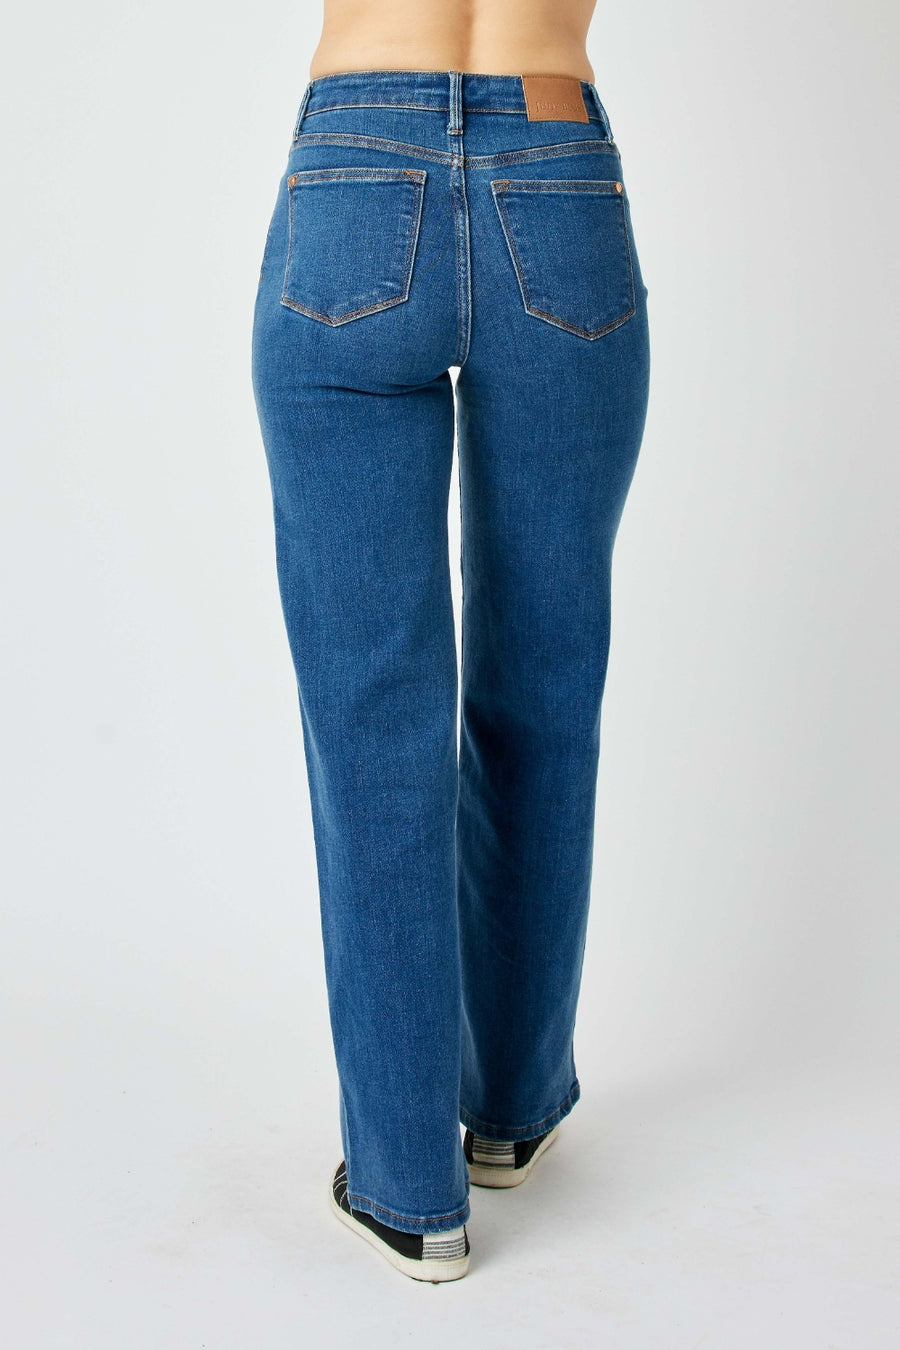 Justine High Rise Straight Jeans by Judy Blue